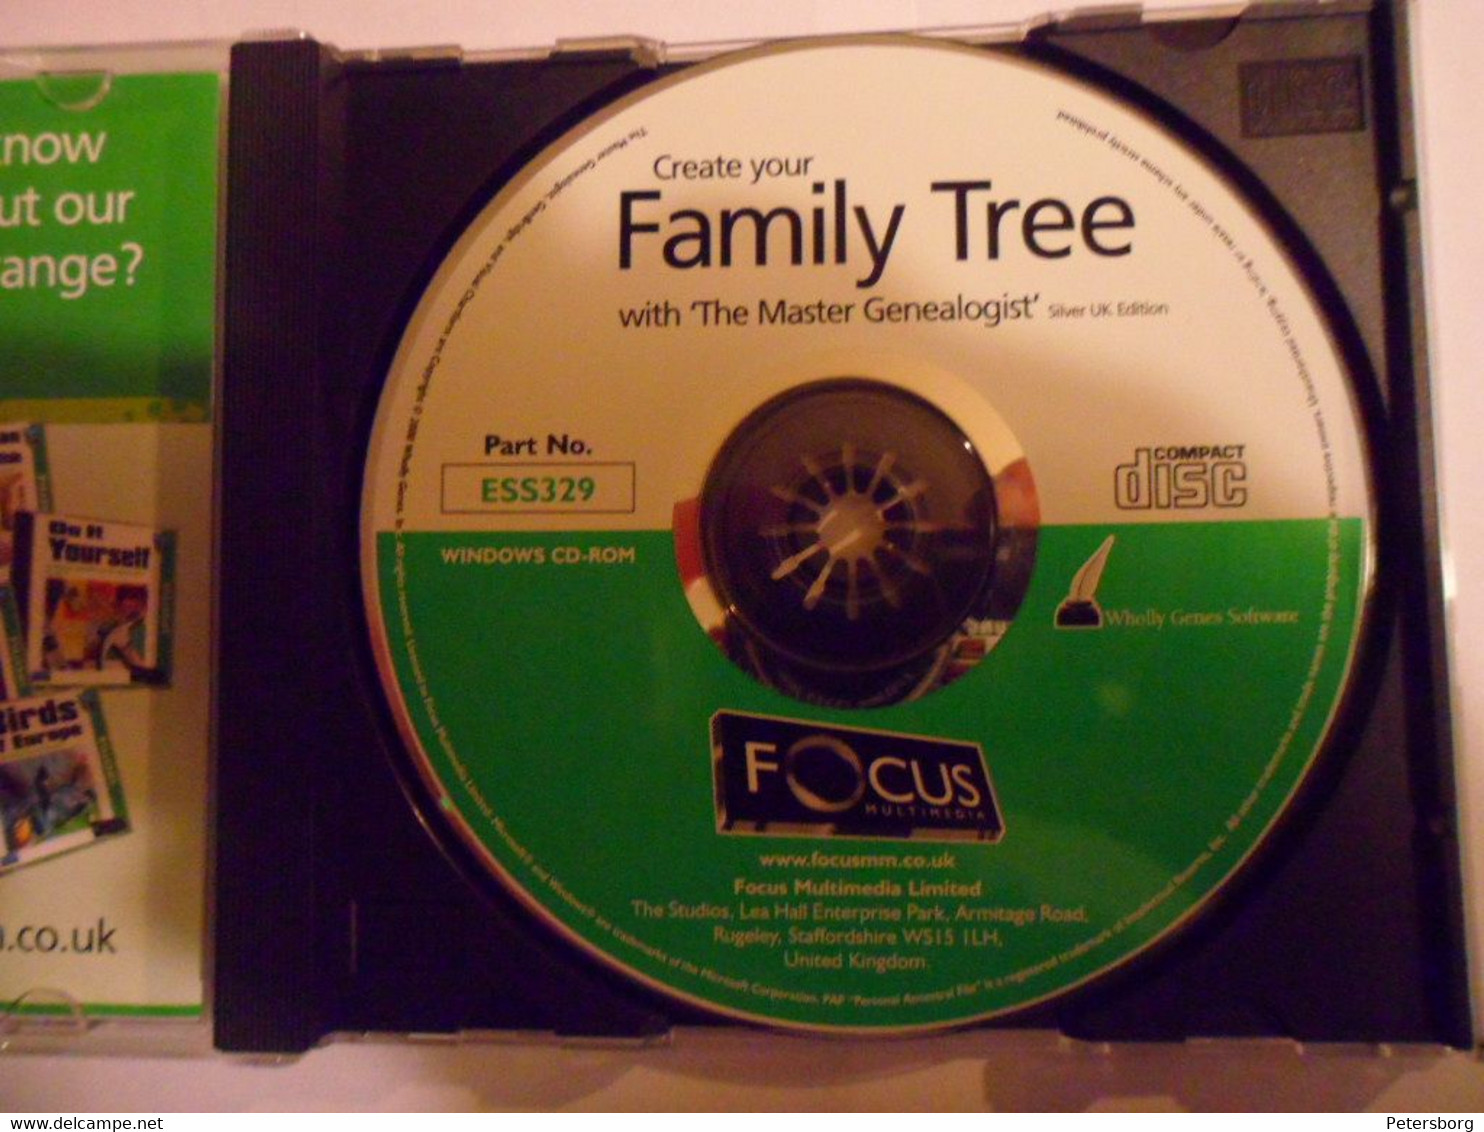 Create Your Family Tree With "the Master Genealogist" - CD